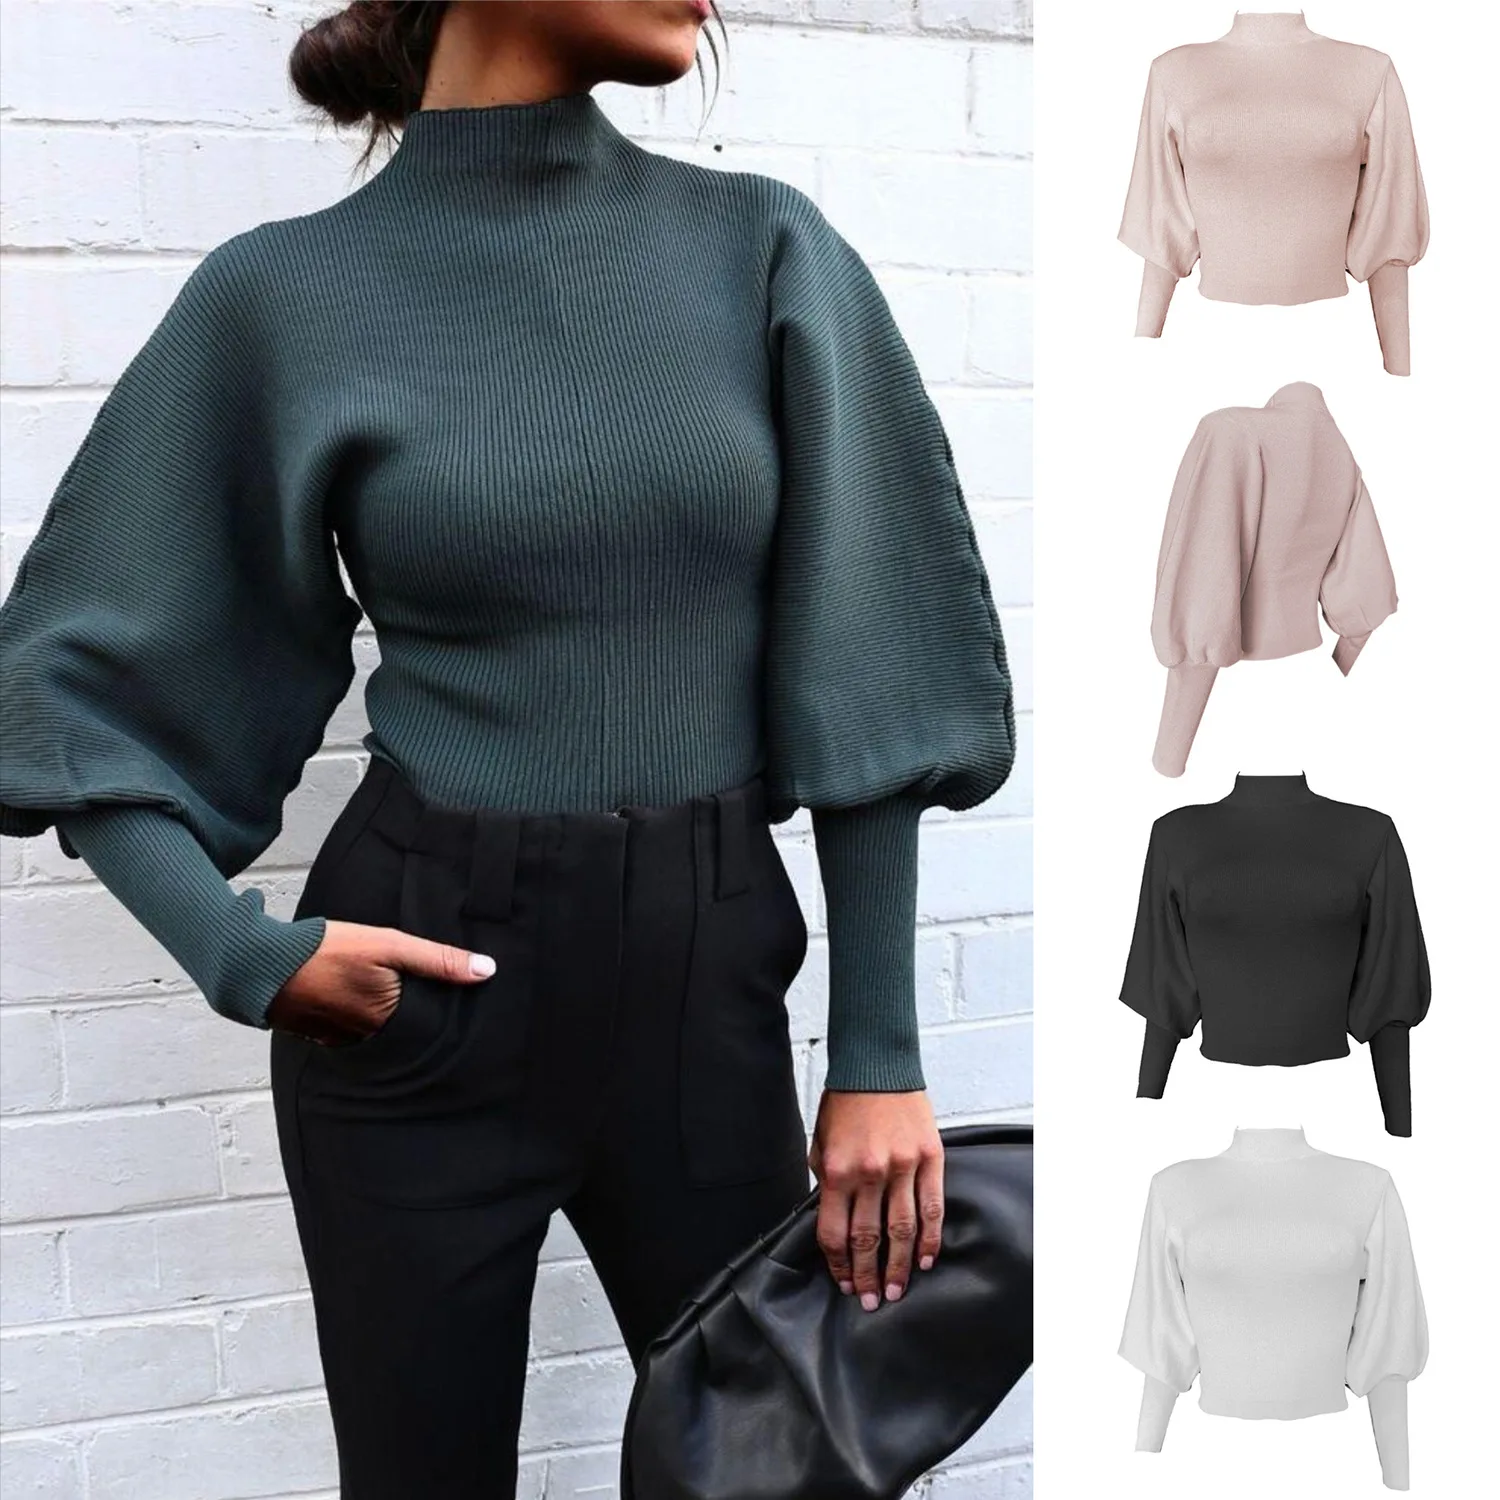 

Winter Turtlenecks Cashmere Sweater Women Vintage Lantern Sleeve Loose Oversized Pullovers Female Thick Warm Knitted Jumpers Top